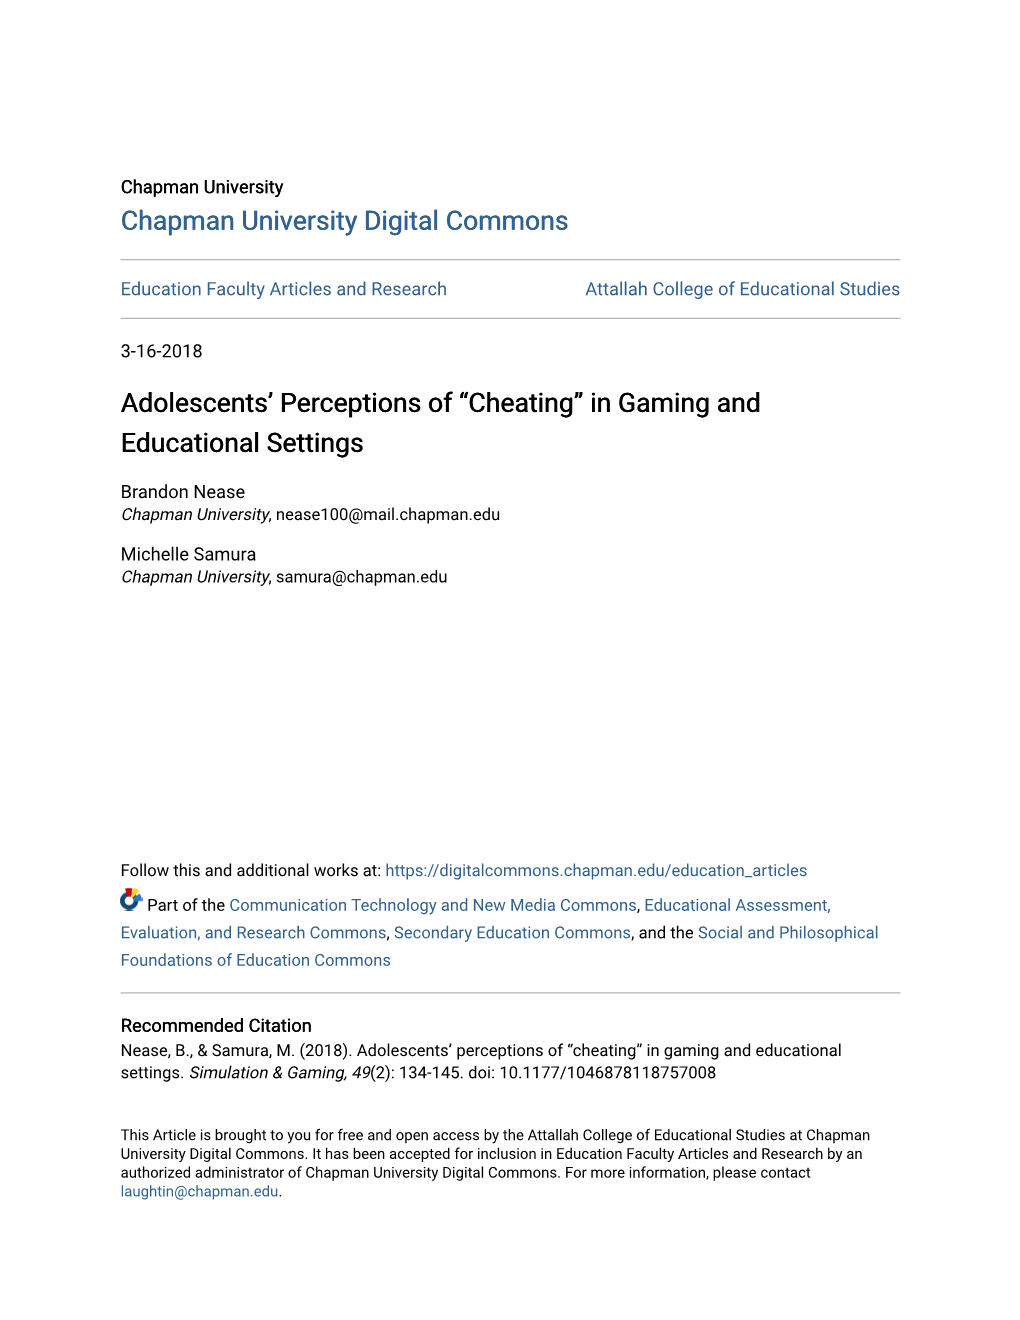 “Cheating” in Gaming and Educational Settings